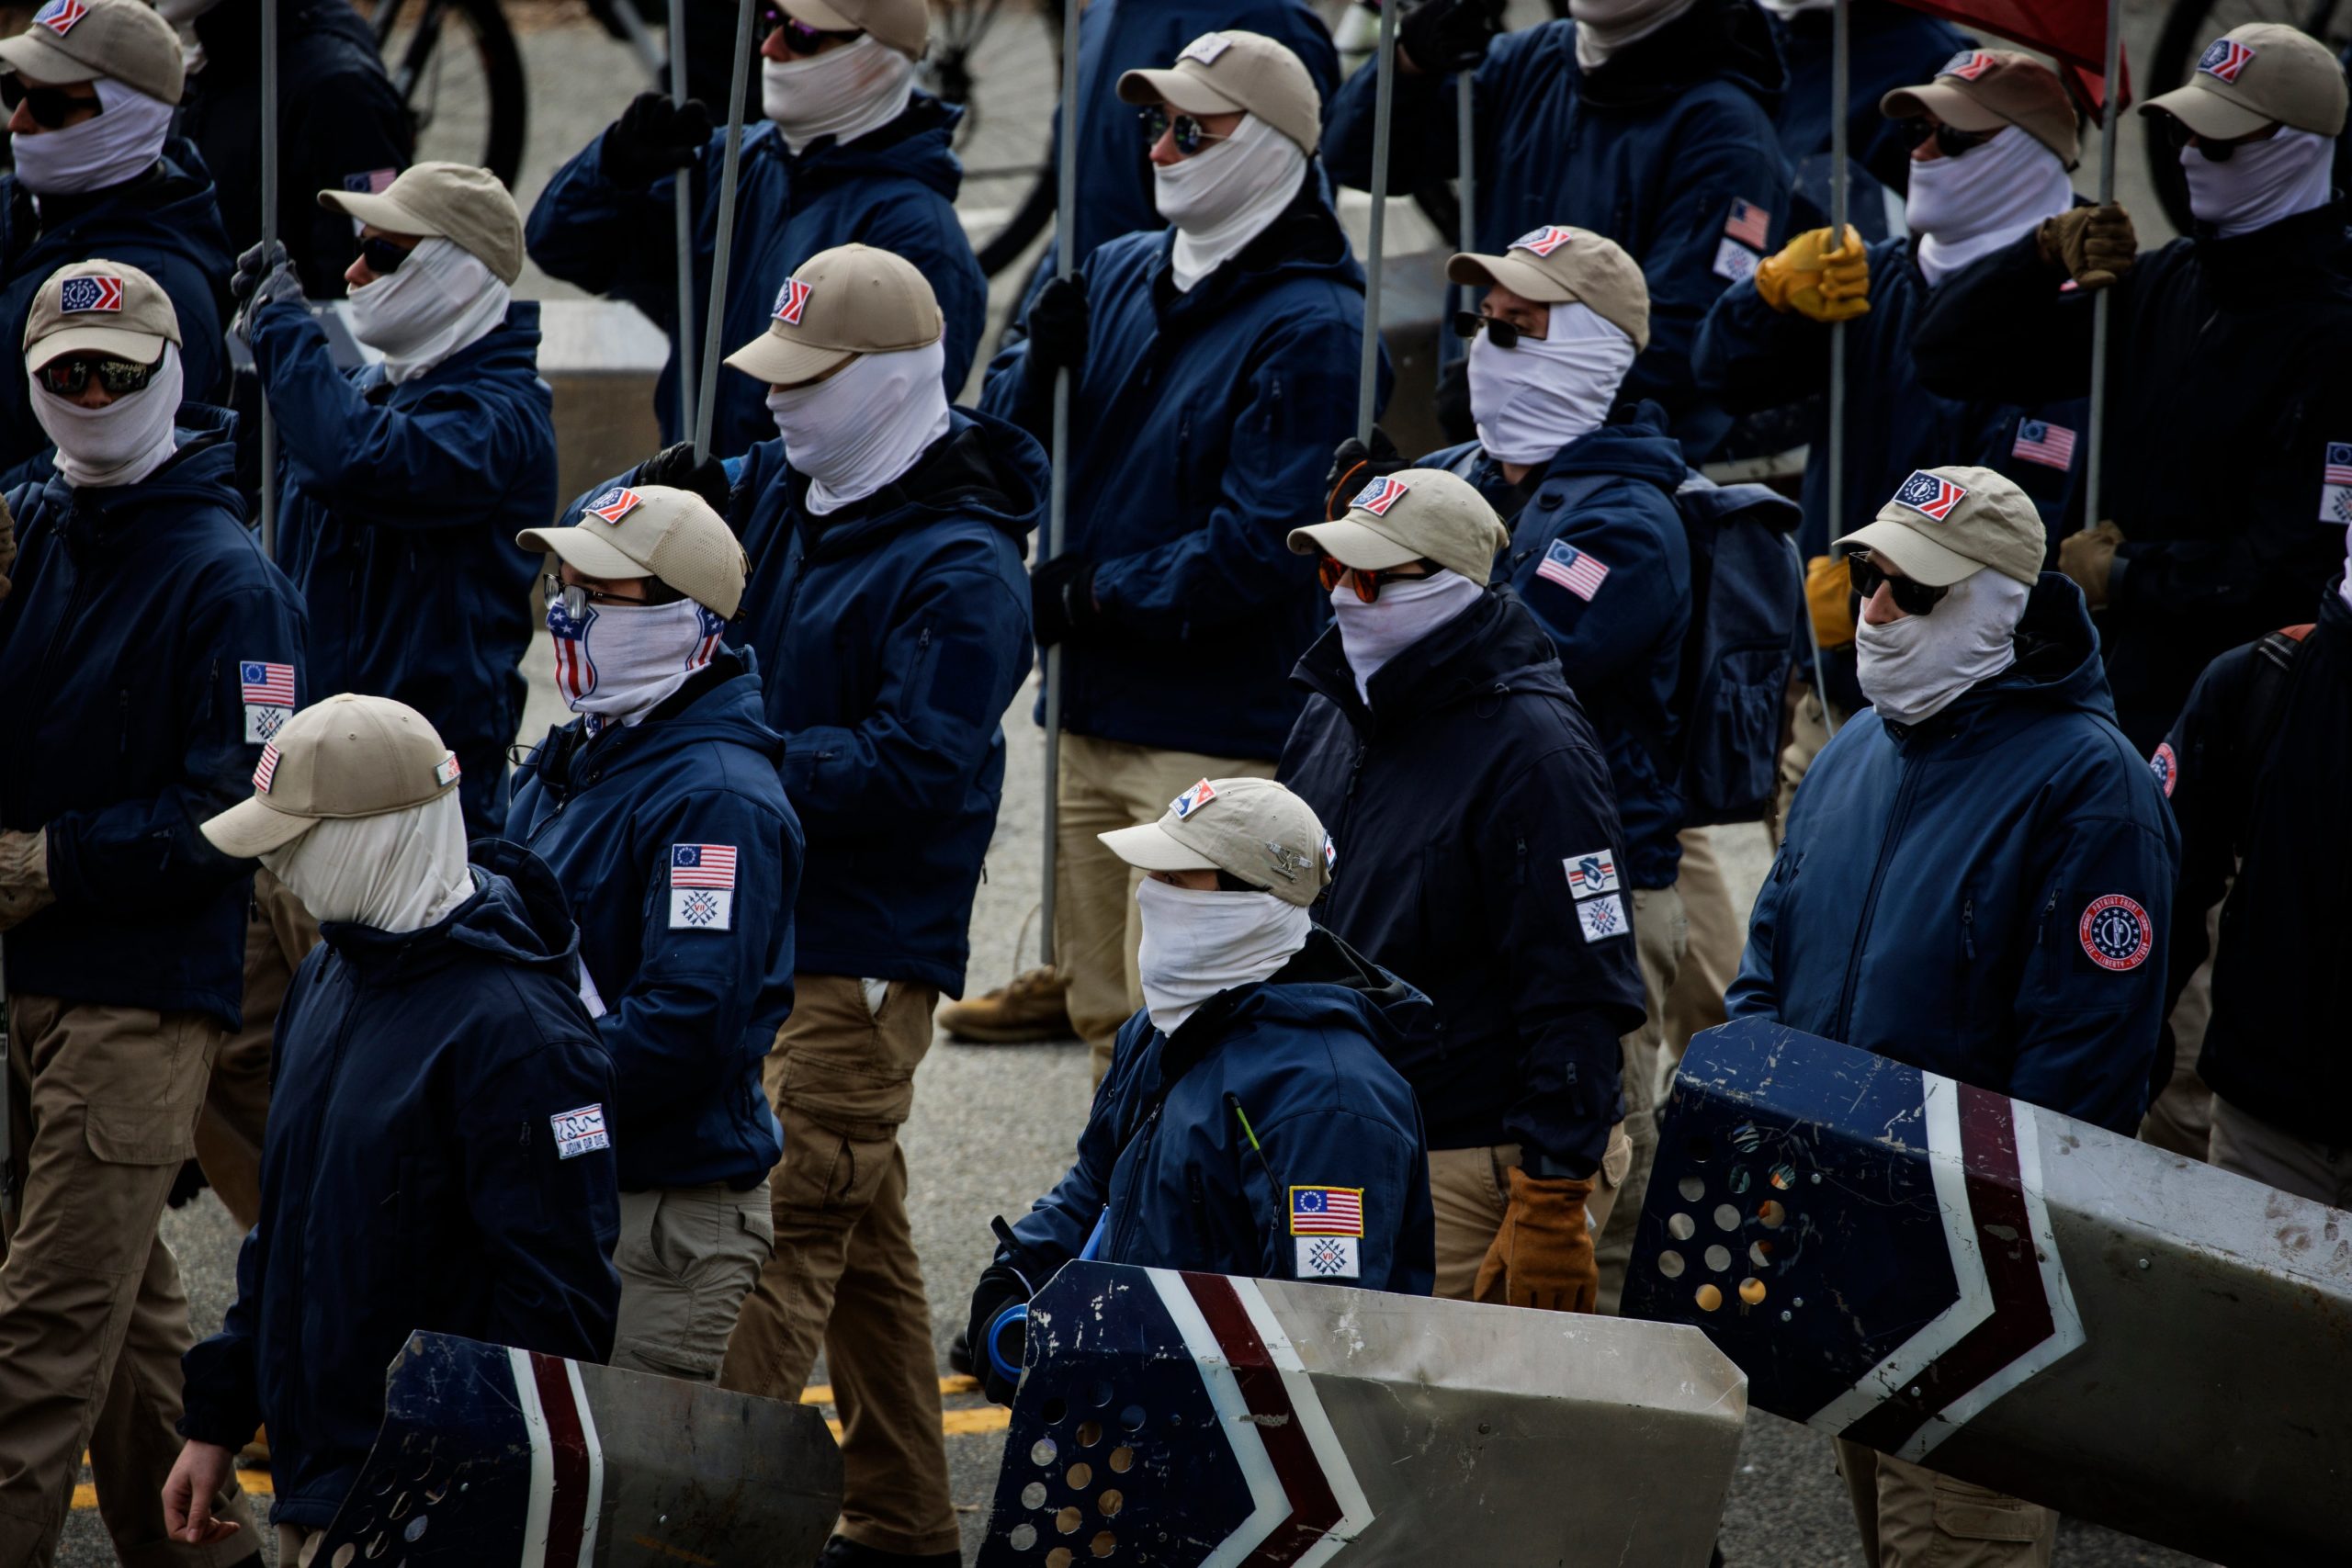 Members of the Patriot Front, an American white nationalist group, marches along Constitution Avenue in Washington, D.C. on January 21, 2022. (Photo: Sipa USA, AP)